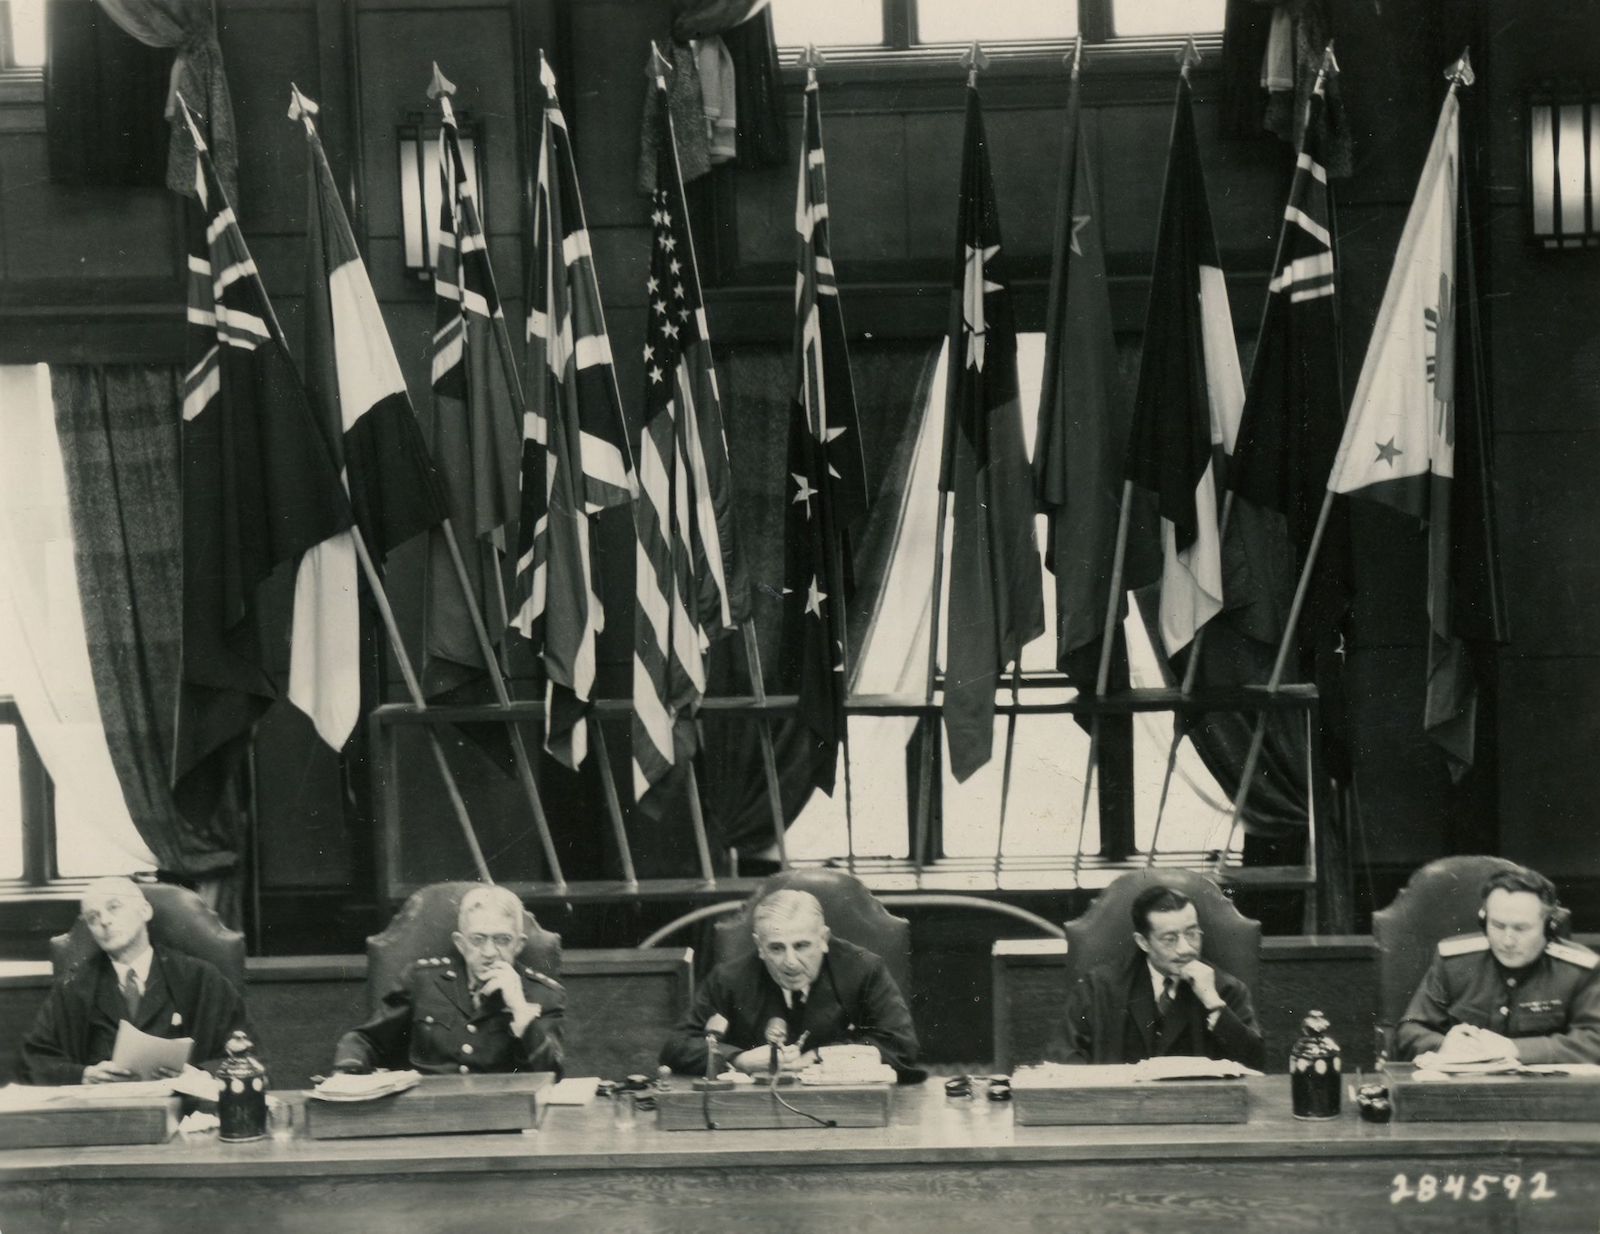 International Military Tribunal for the Far East judges on the bench, 3 March 1947. UVA LAW Special Collections (CC BY 4.0).